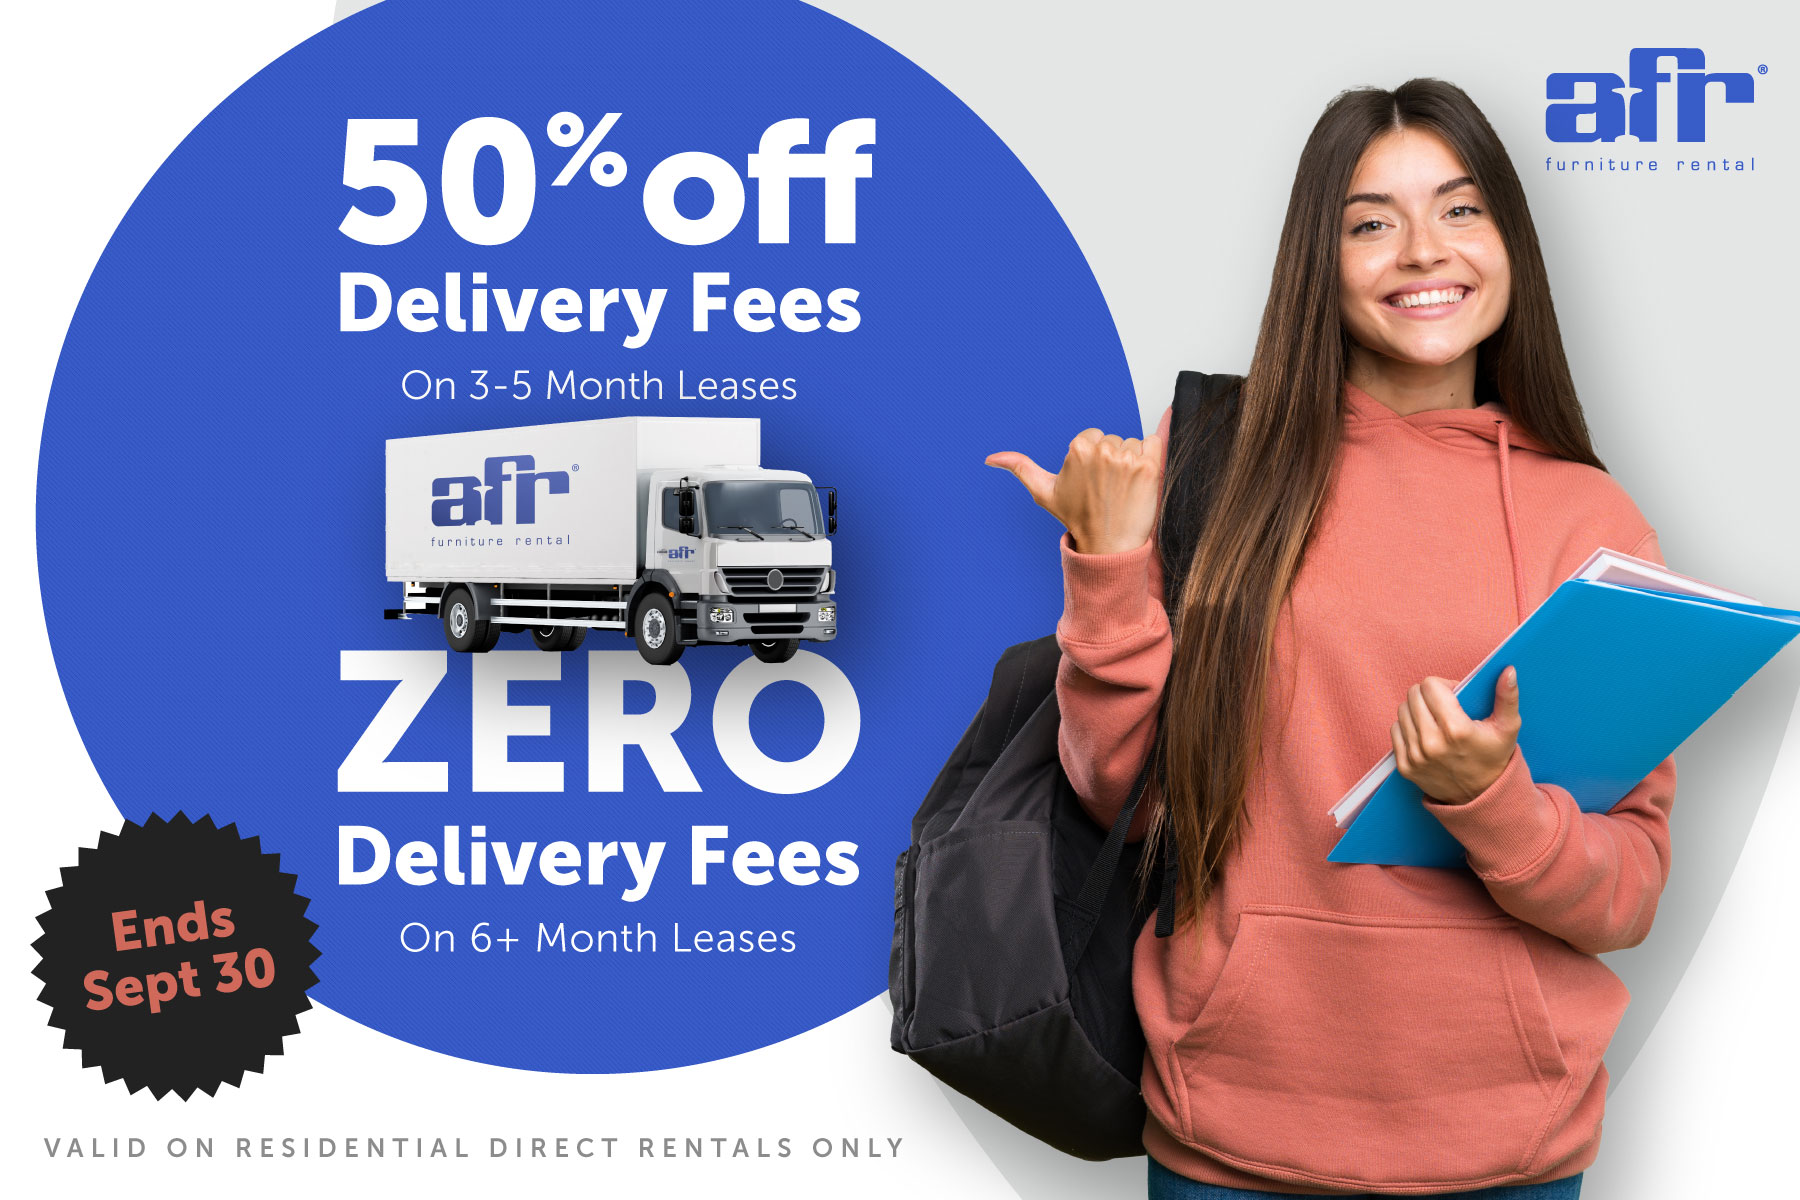 blue circle with promo text: 50% off Delivery Fees On 3-5 Month Leases ZERO Delivery Fees On 6+ Month Leases. Ends Sept 30. Valid on Residential Direct Rentals Only. Foreground has an AFR employee smiling while carrying a chair wrapped in plastic